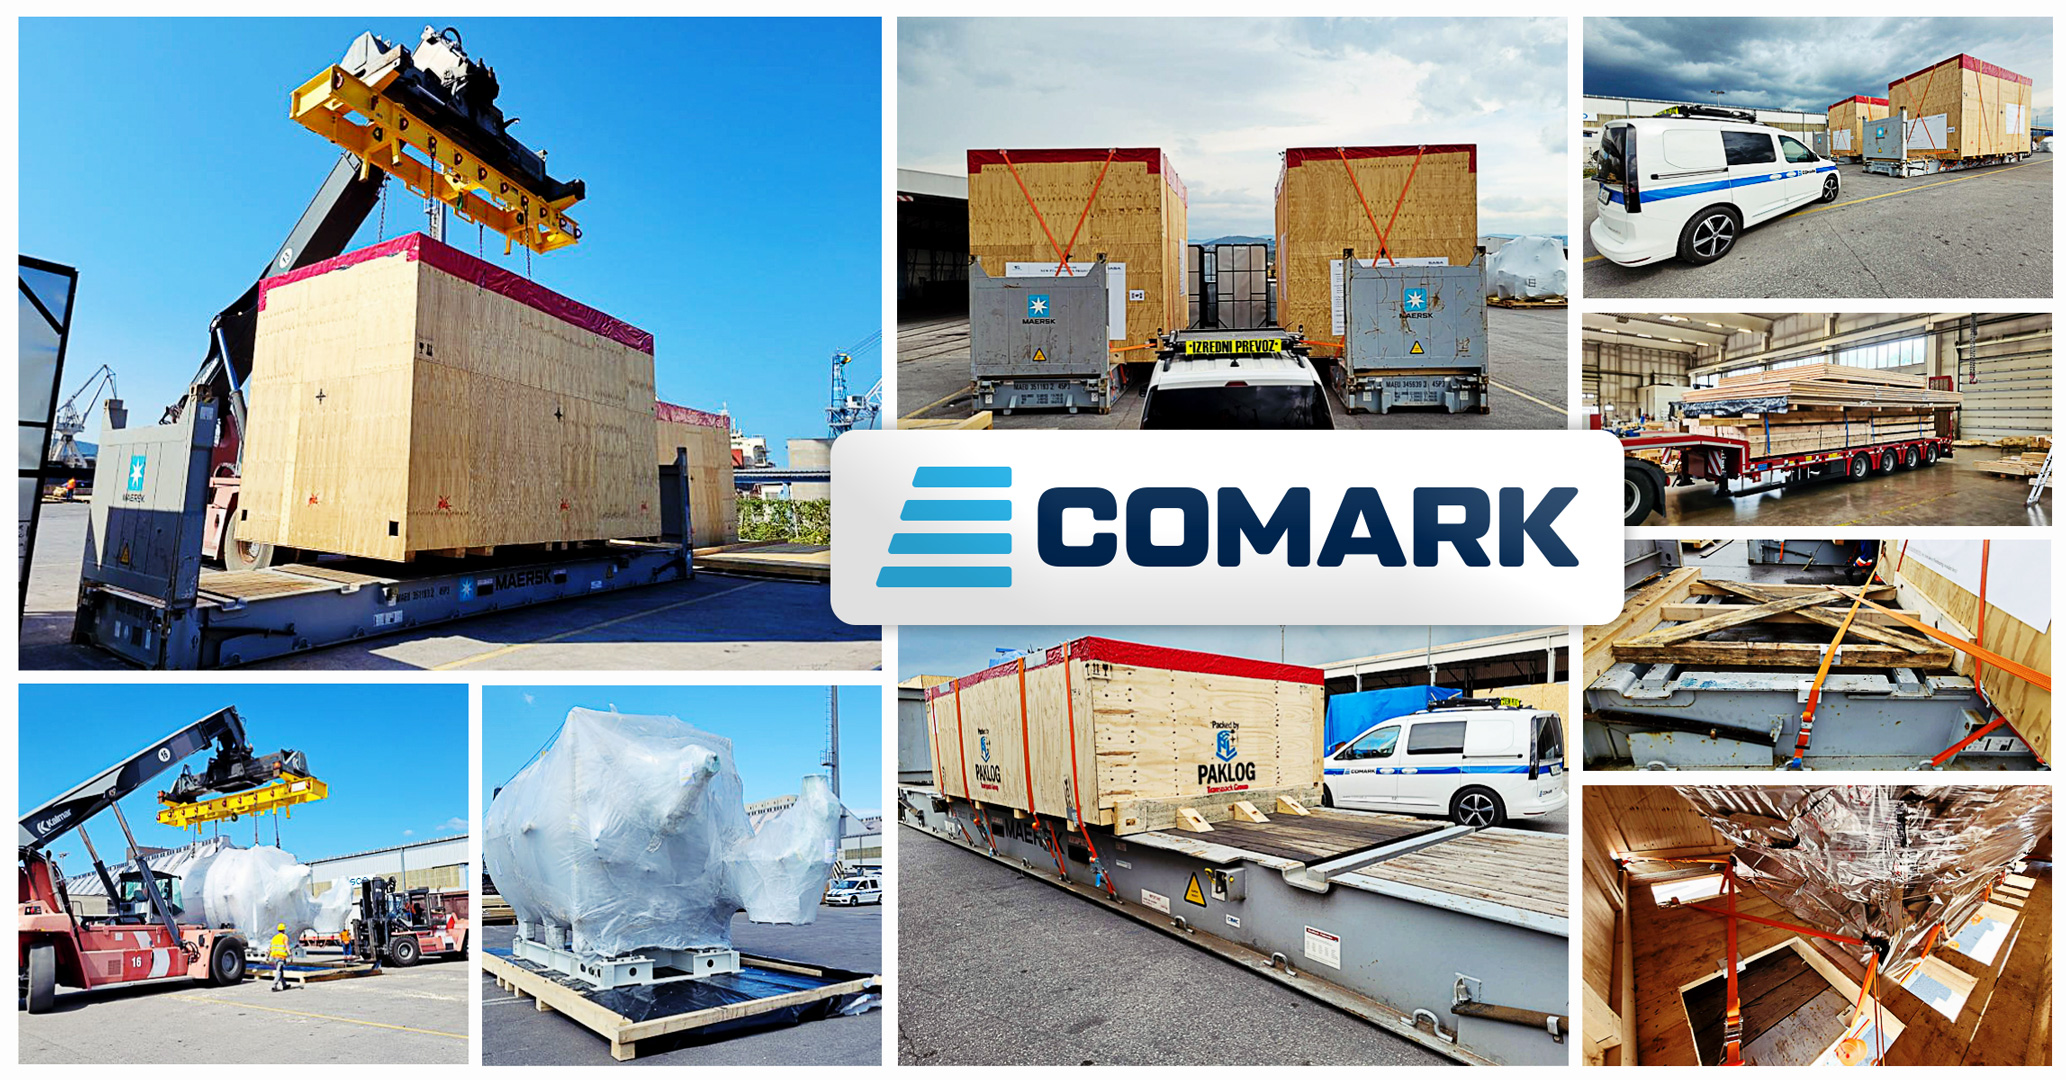 Comark Packed this OOG Cargo with Final Dimensions of 900 x 480 x 495 cm & Total Weight of 45mt for the Journey Across the Ocean with their Field Packing Unit